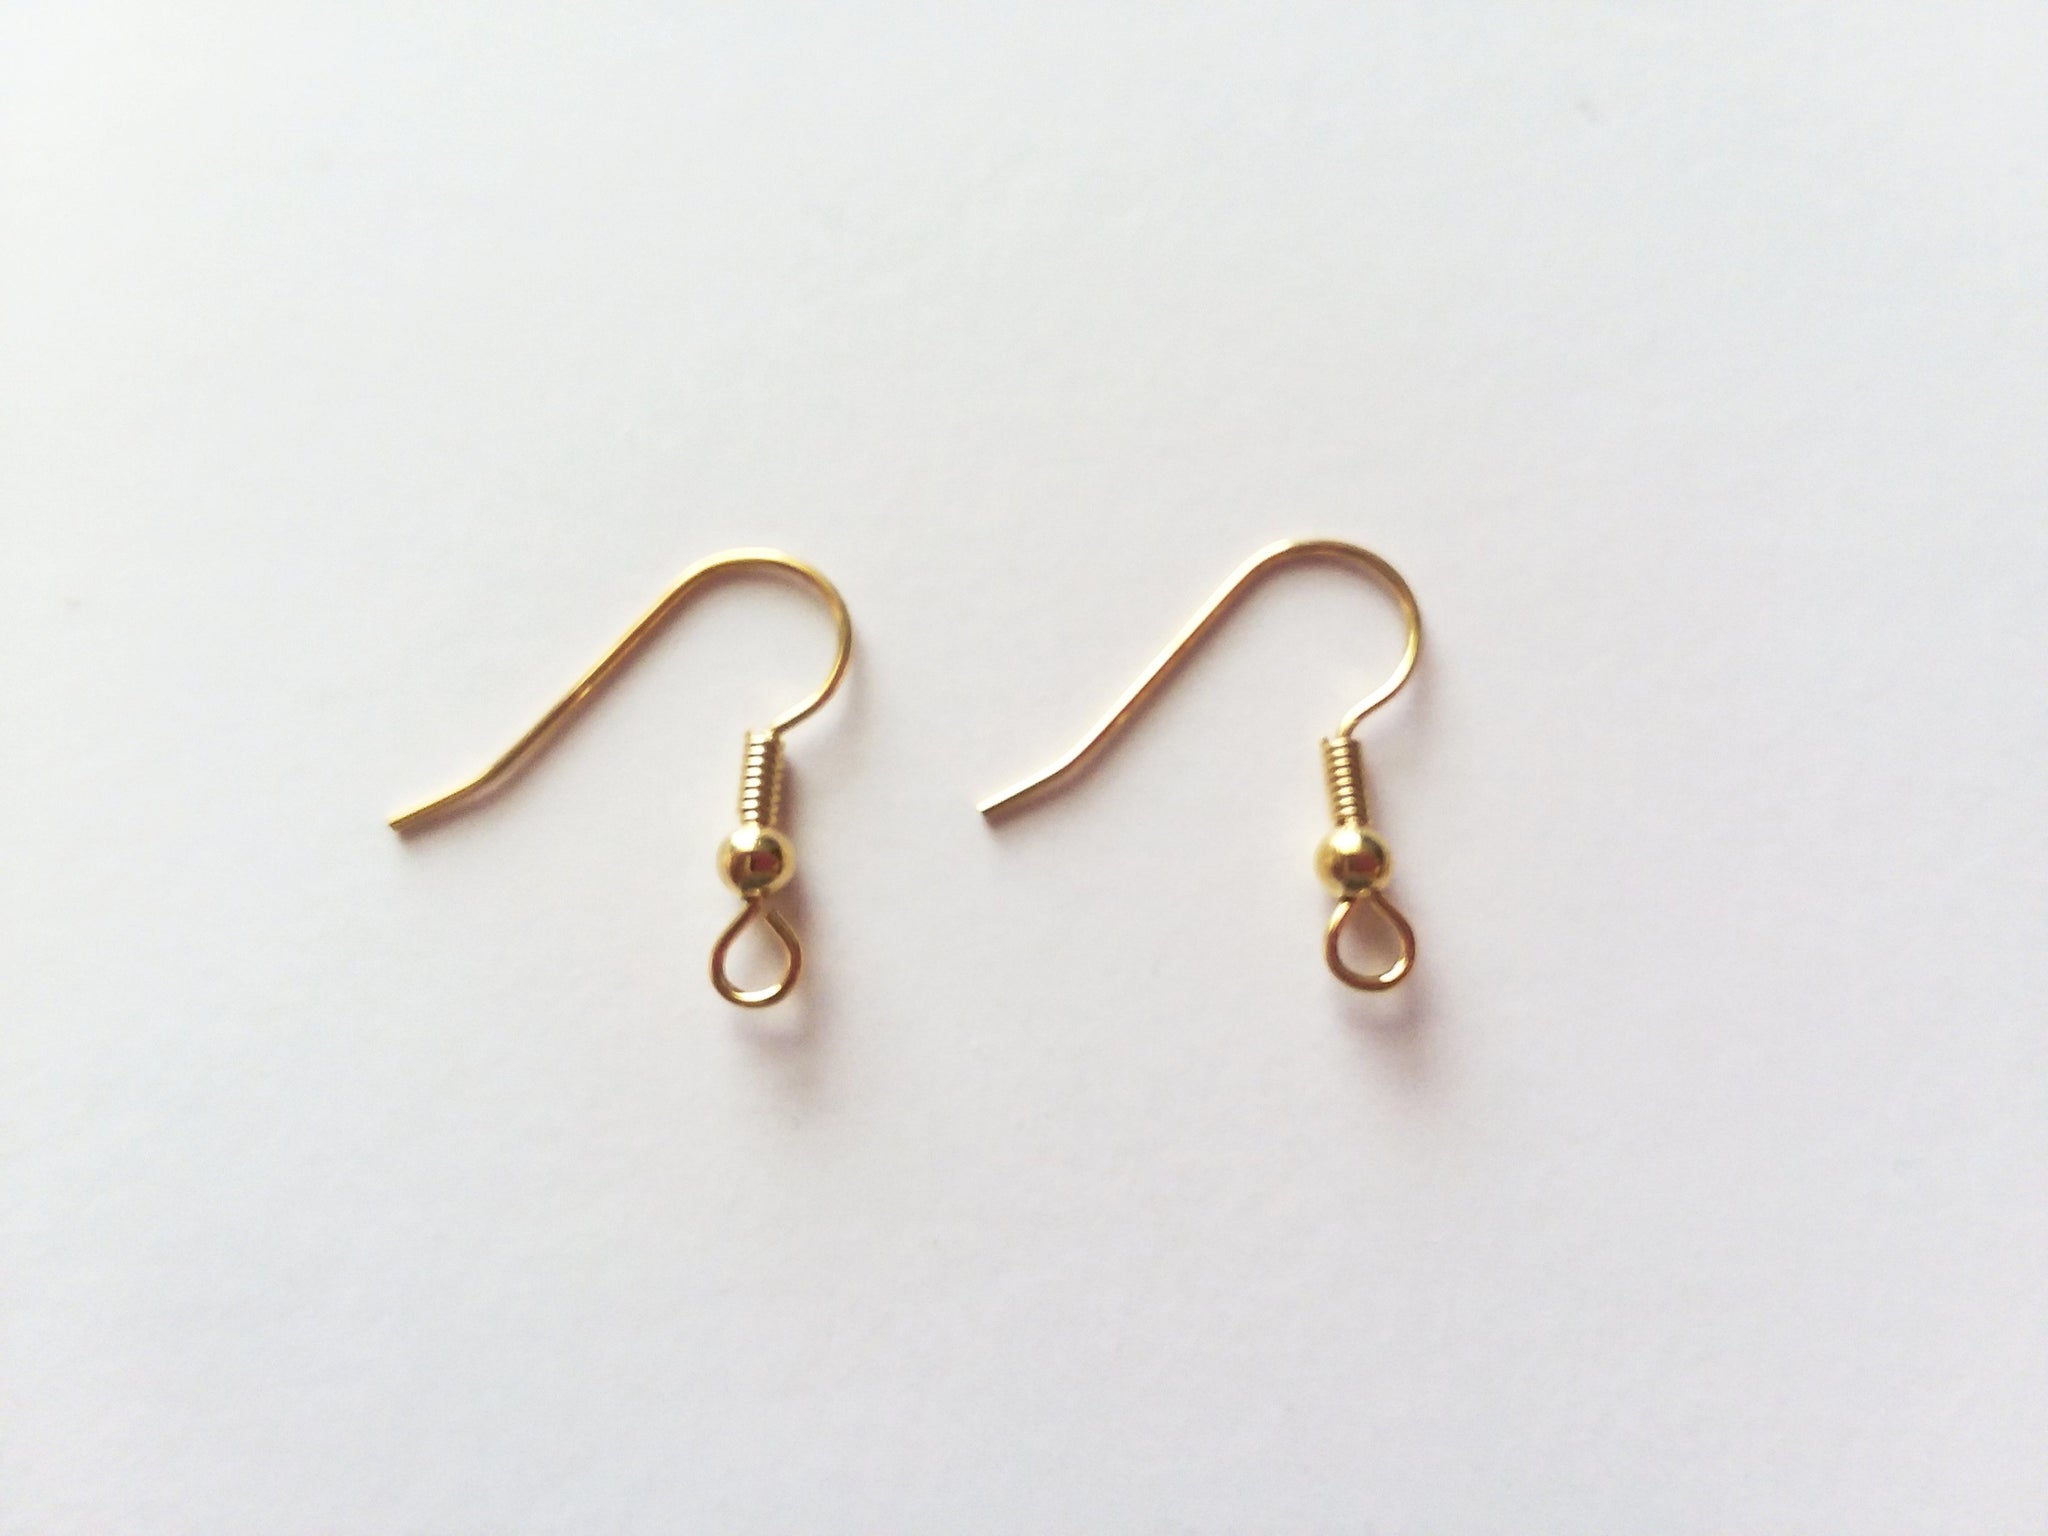 100 Gold Plated Ear Wires